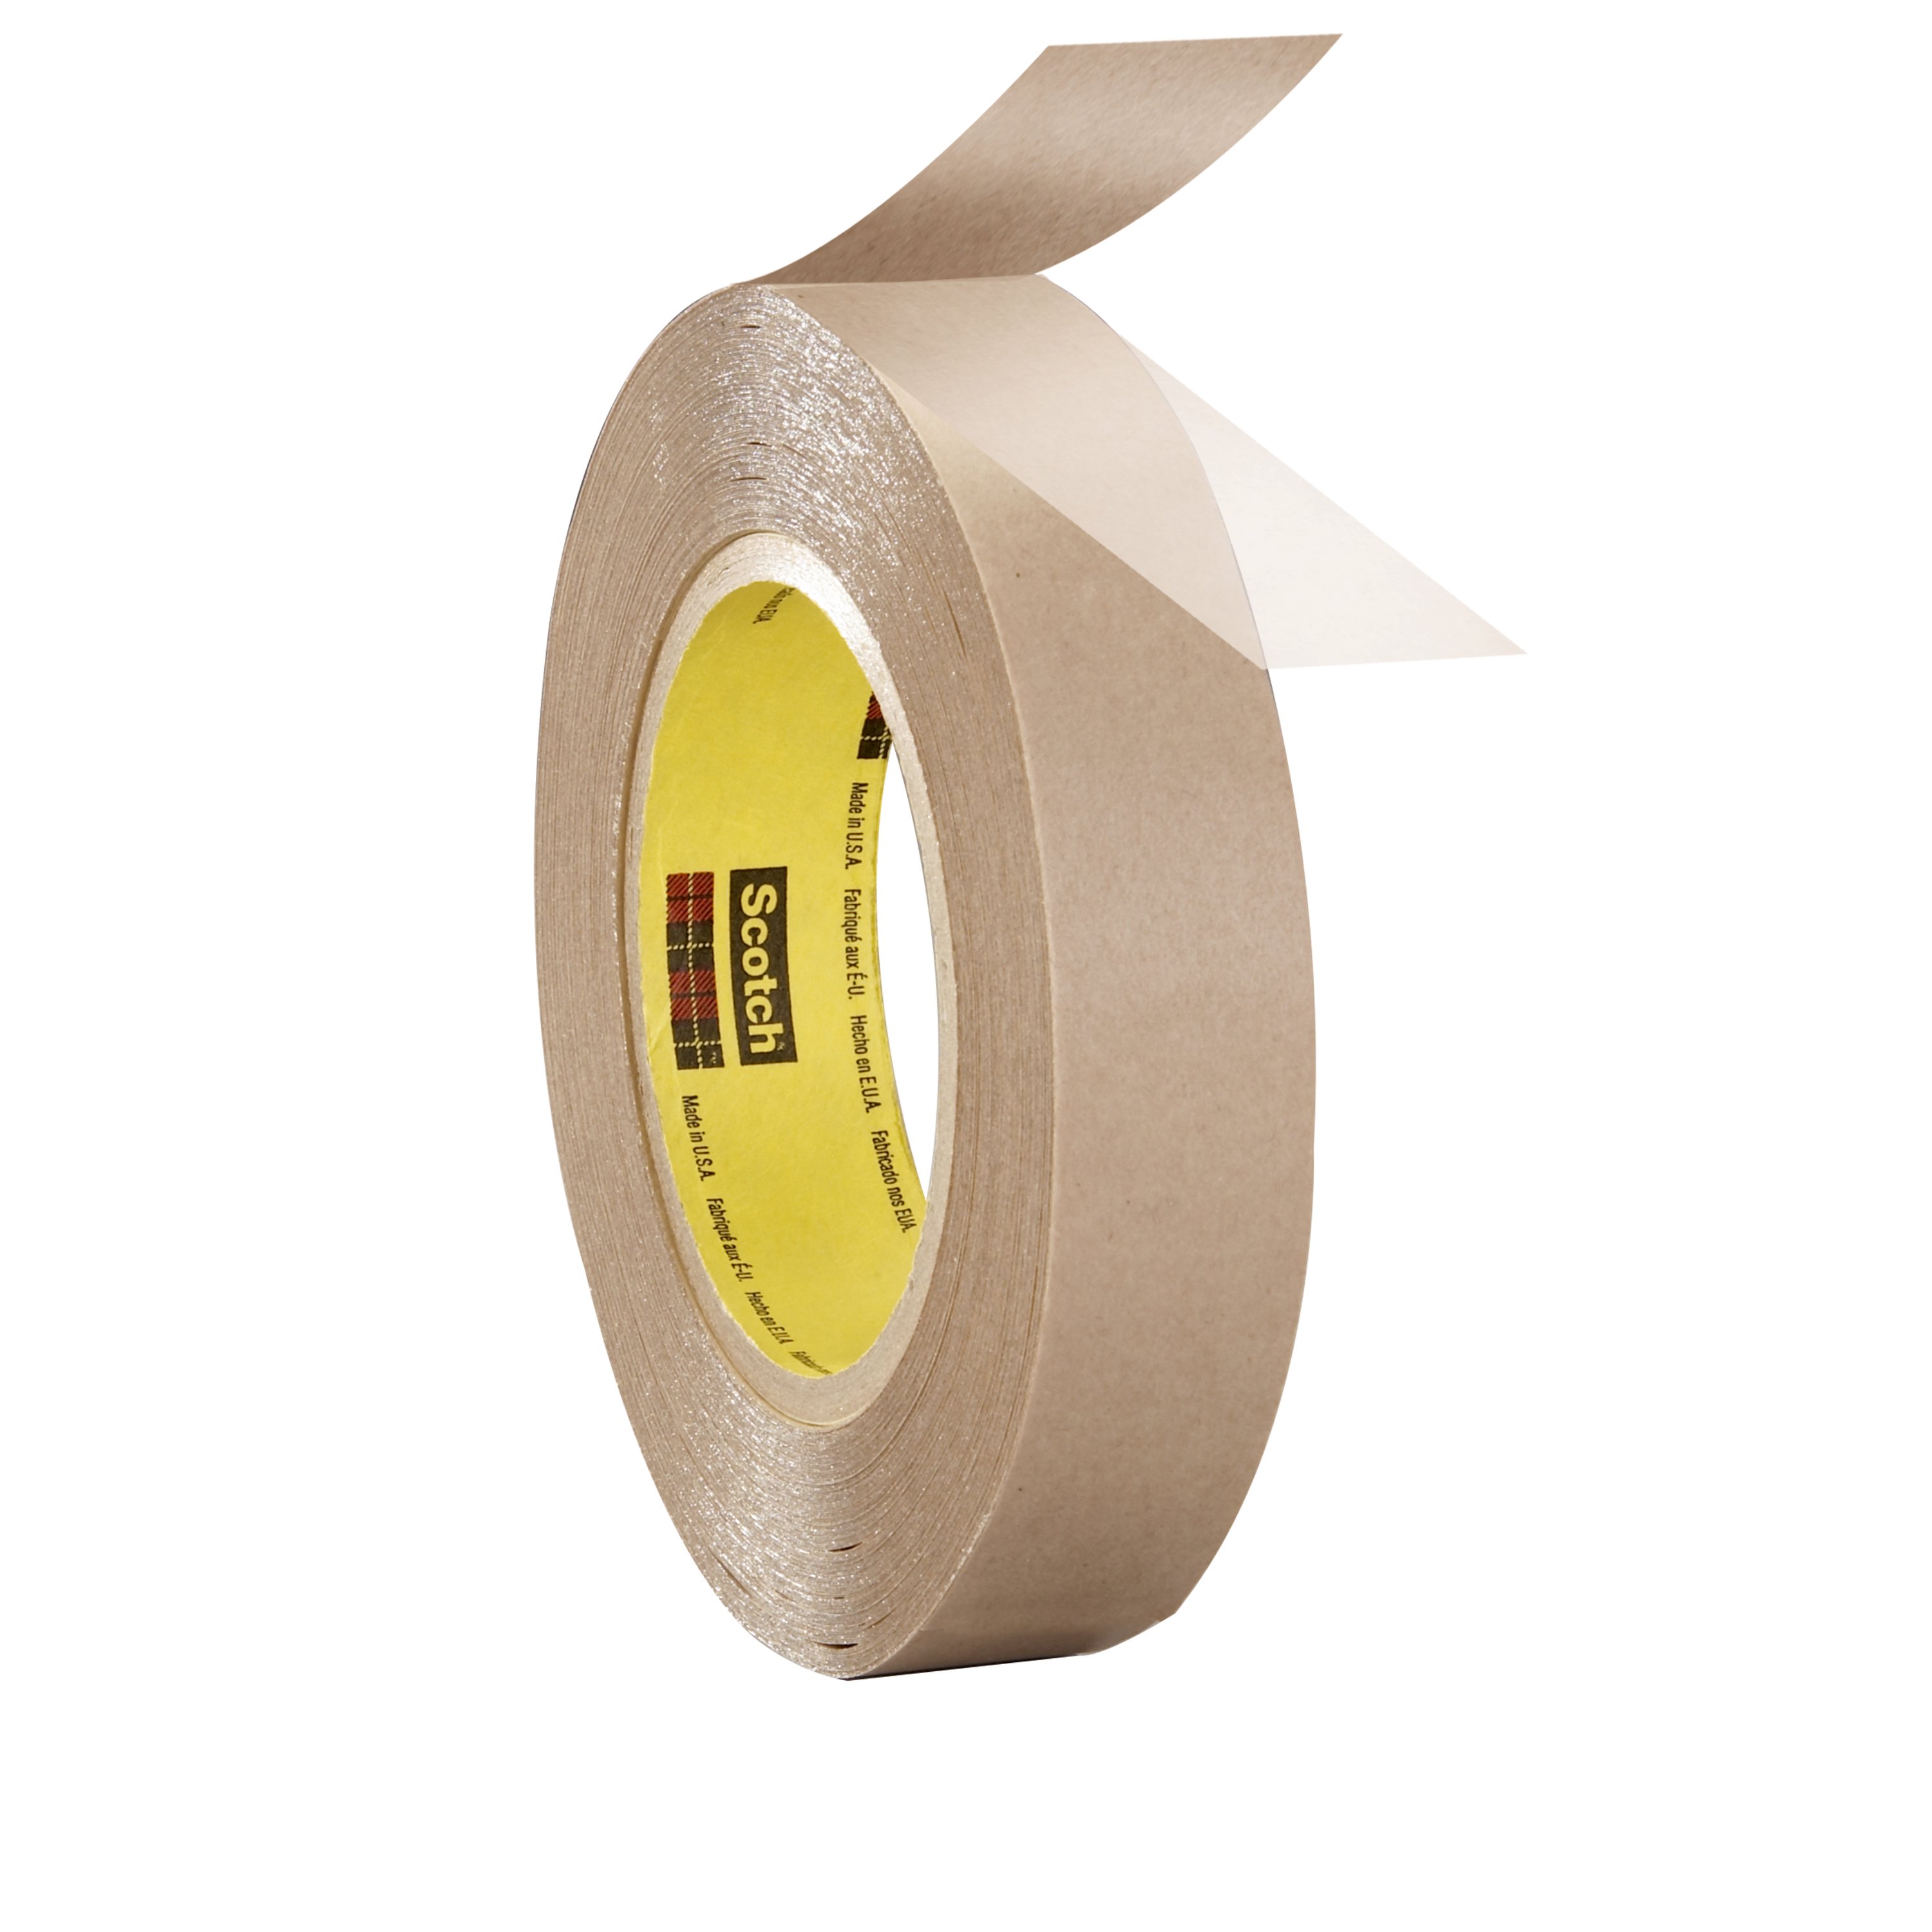 A roll of double-coated tape with a translucent layer revealed beneath a brown liner